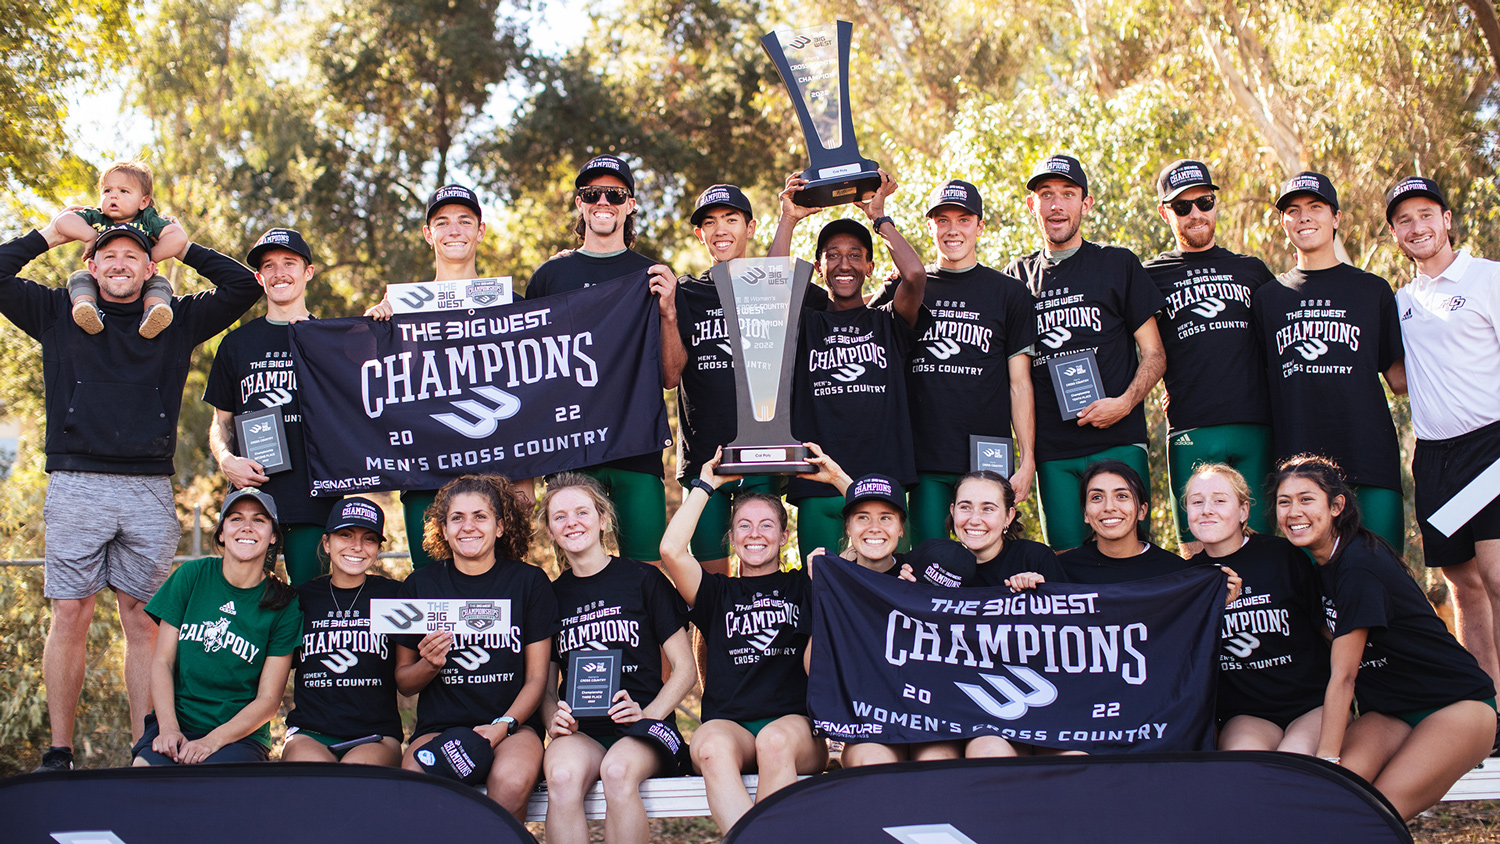 The men's and women's cross country teams wear black shirts and hoist conference championship trophies and banners